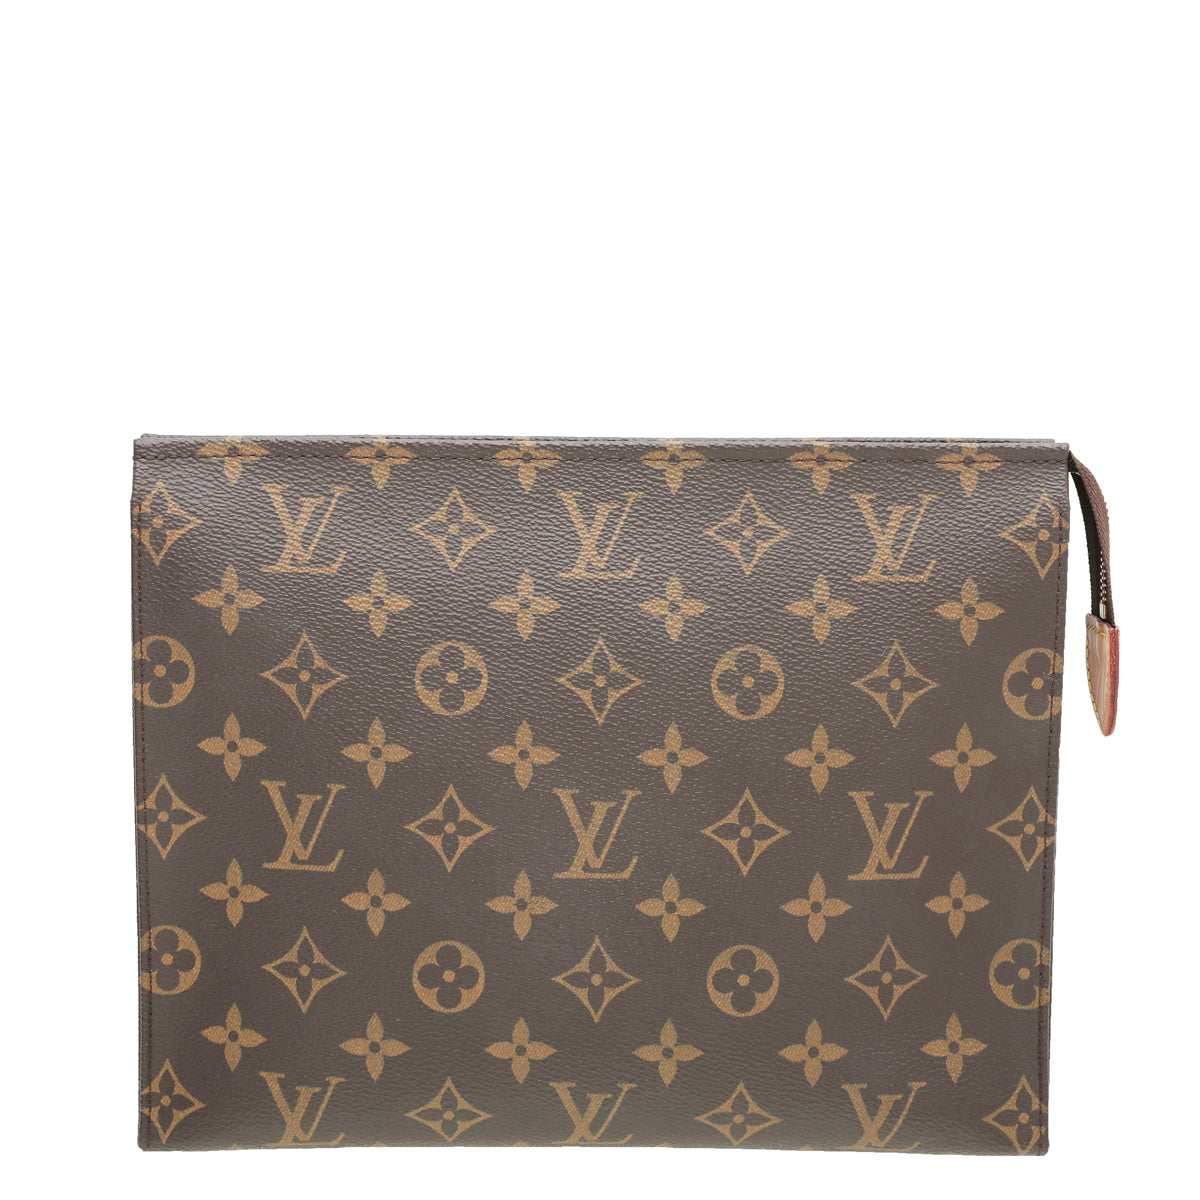 Toiletry 26 - 17 For Sale on 1stDibs  louis vuitton toiletry pouch 26 for  sale, lv toiletry 26, louis vuitton toiletry 26